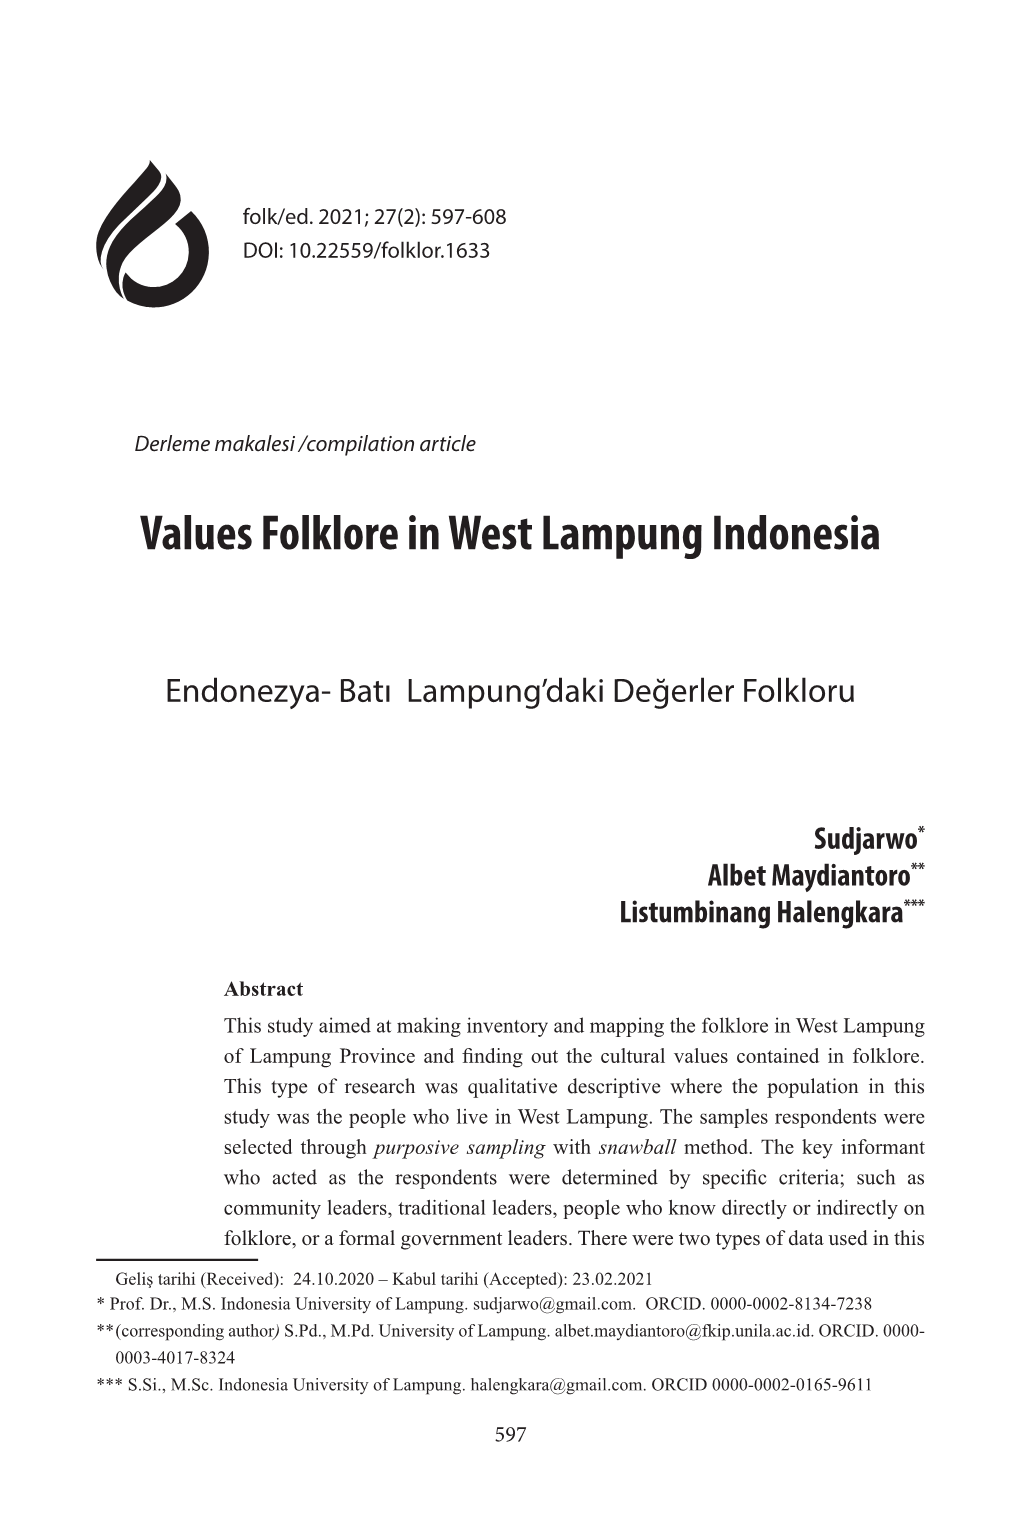 Values Folklore in West Lampung Indonesia